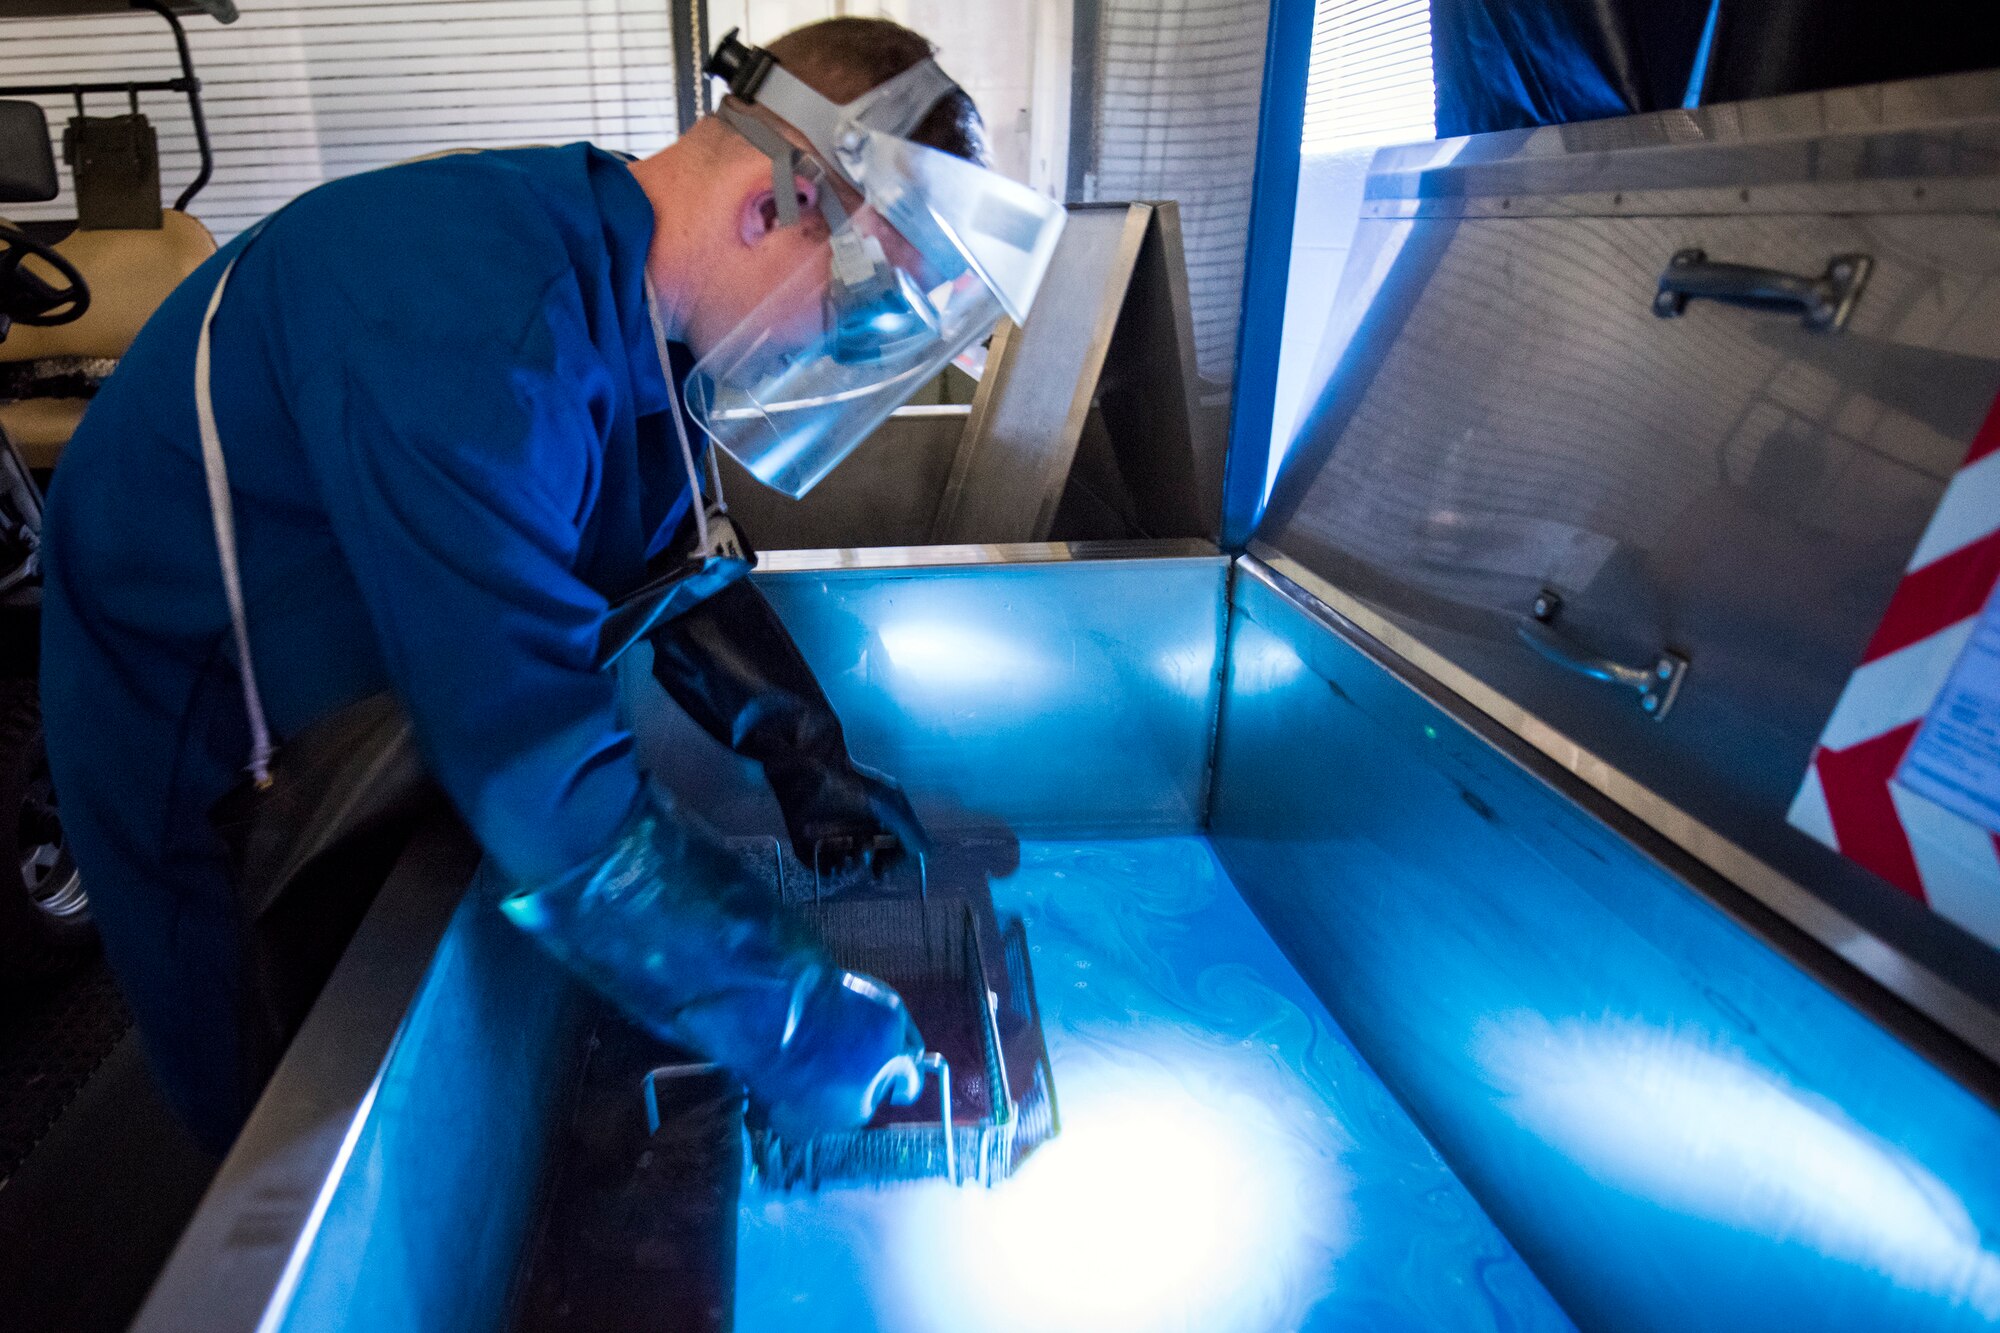 Senior Airman Matthew Horne, 23d Maintenance Squadron non-destructive inspection (NDI) specialist, lifts an aircraft part out of a pool of florescent dye, May 2, 2018, at Moody Air Force Base, Ga. NDI technicians use various methods to complete these inspections such as X-ray, florescent dye penetrant, oil analysis and ultrasonic scanning to examine and inspect numerous aircraft parts and components to ensure that they are in usable condition. (U.S. Air Force photo by Airman 1st Class Eugene Oliver)